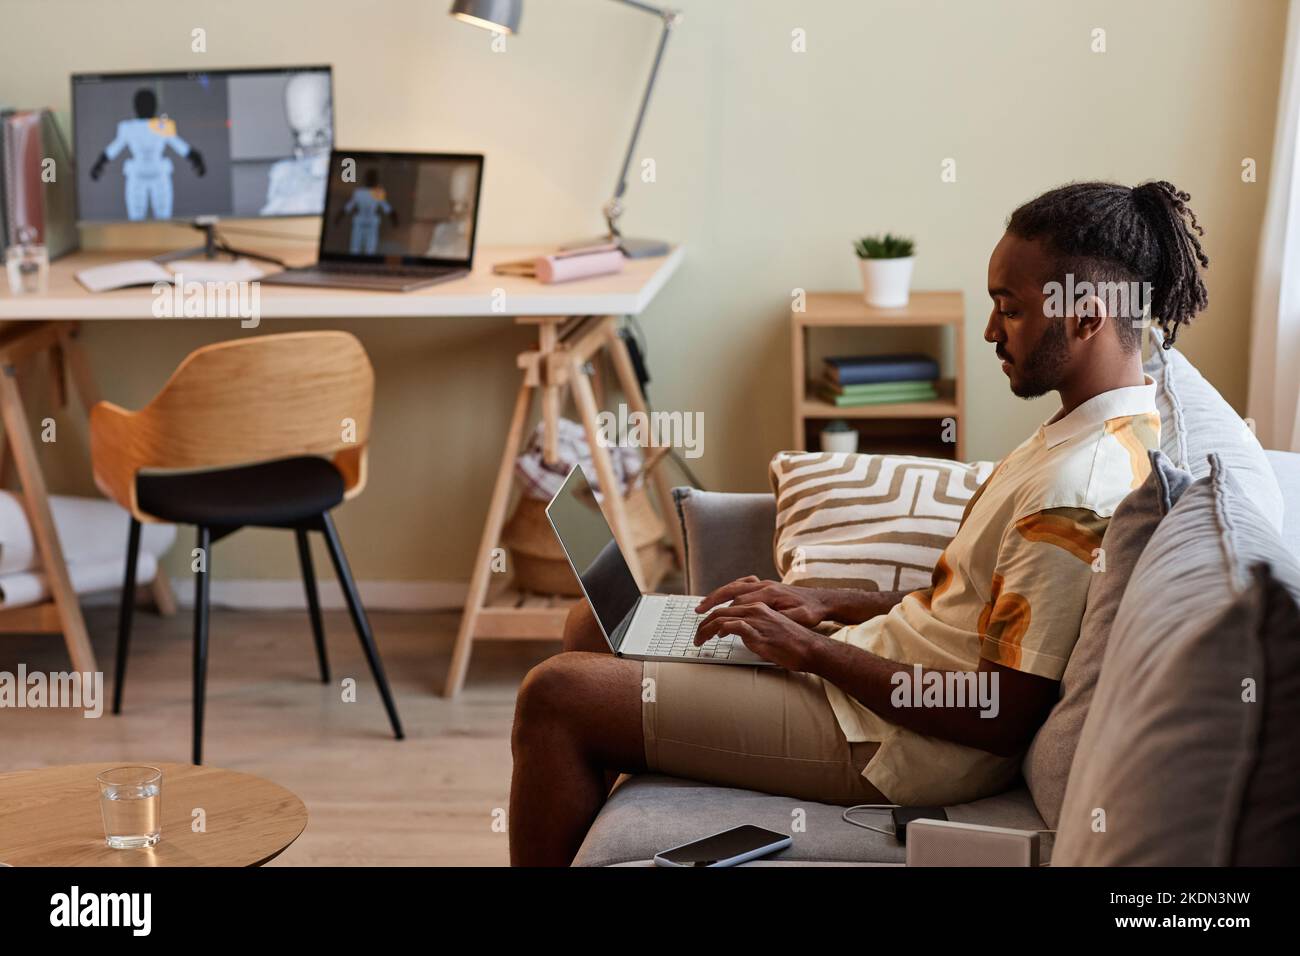 Side view portrait of creative black man using laptop while sitting on sofa in modern home interior, copy space Stock Photo